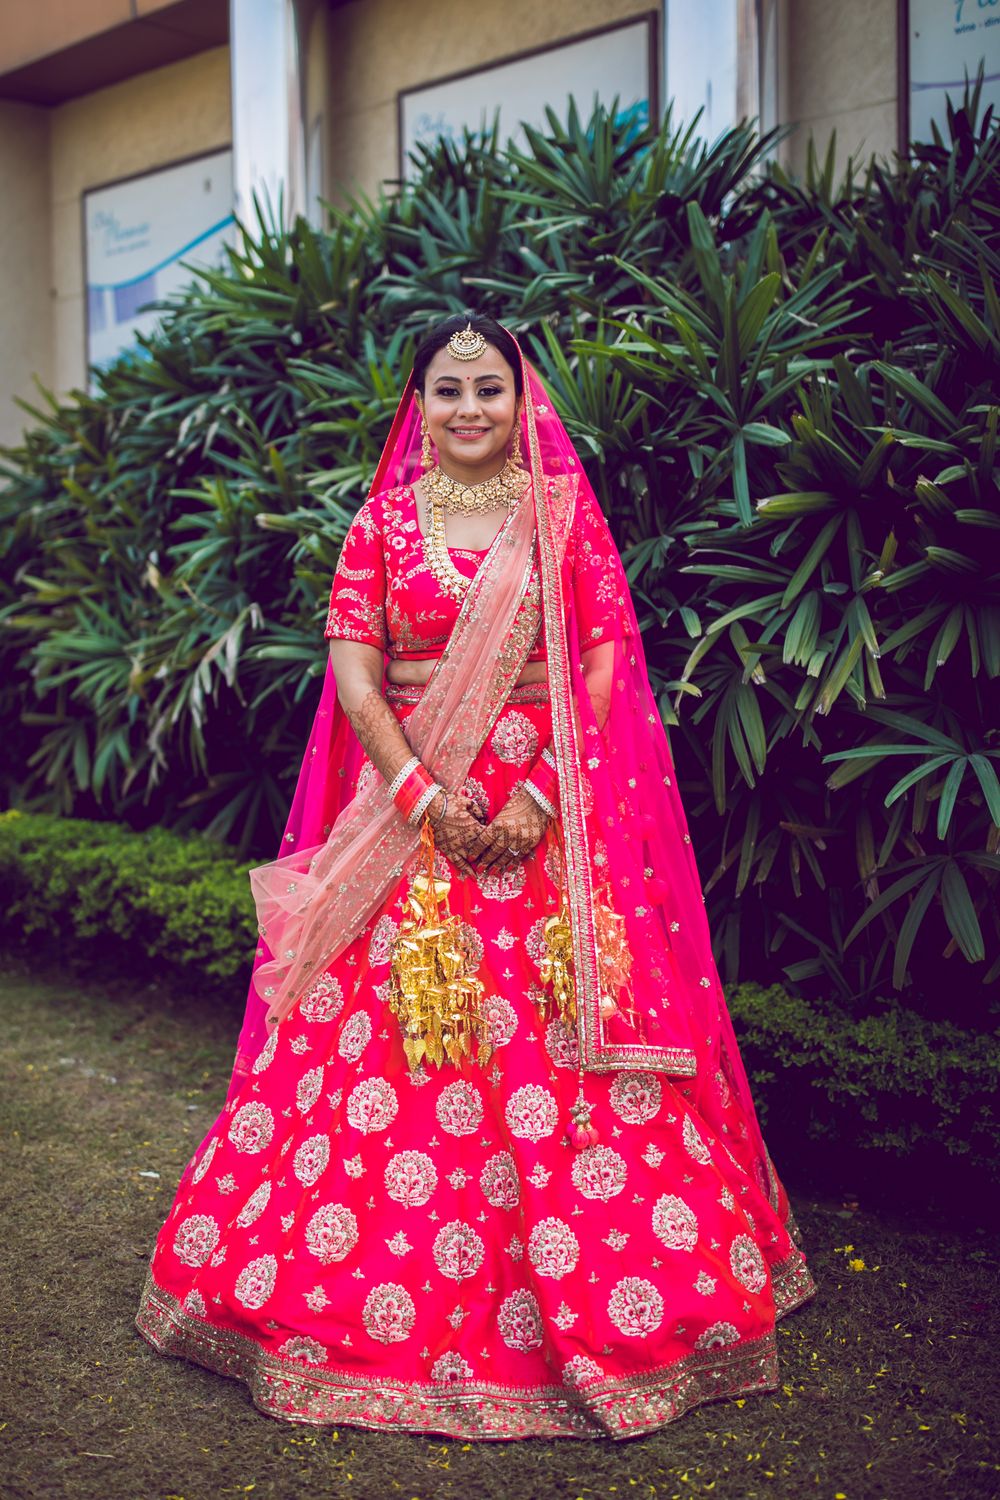 Photo of A beautiful bridal portrait in a bright pink lehenga and gold jewellery.